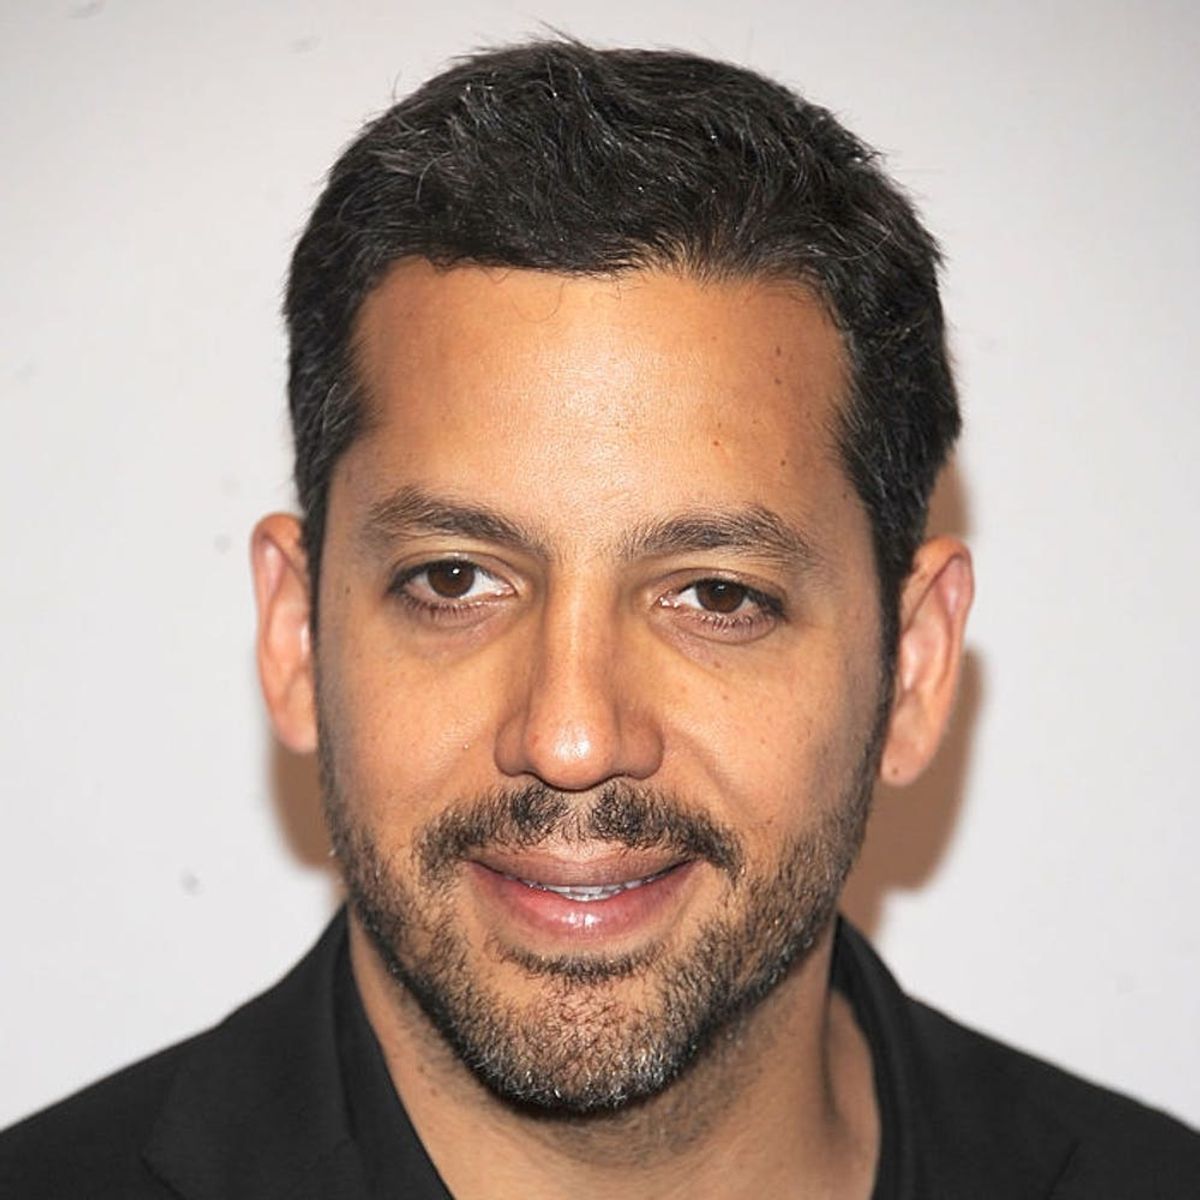 David Blaine Just Had a MAJOR Scare Doing a Magic Trick With a Bullet